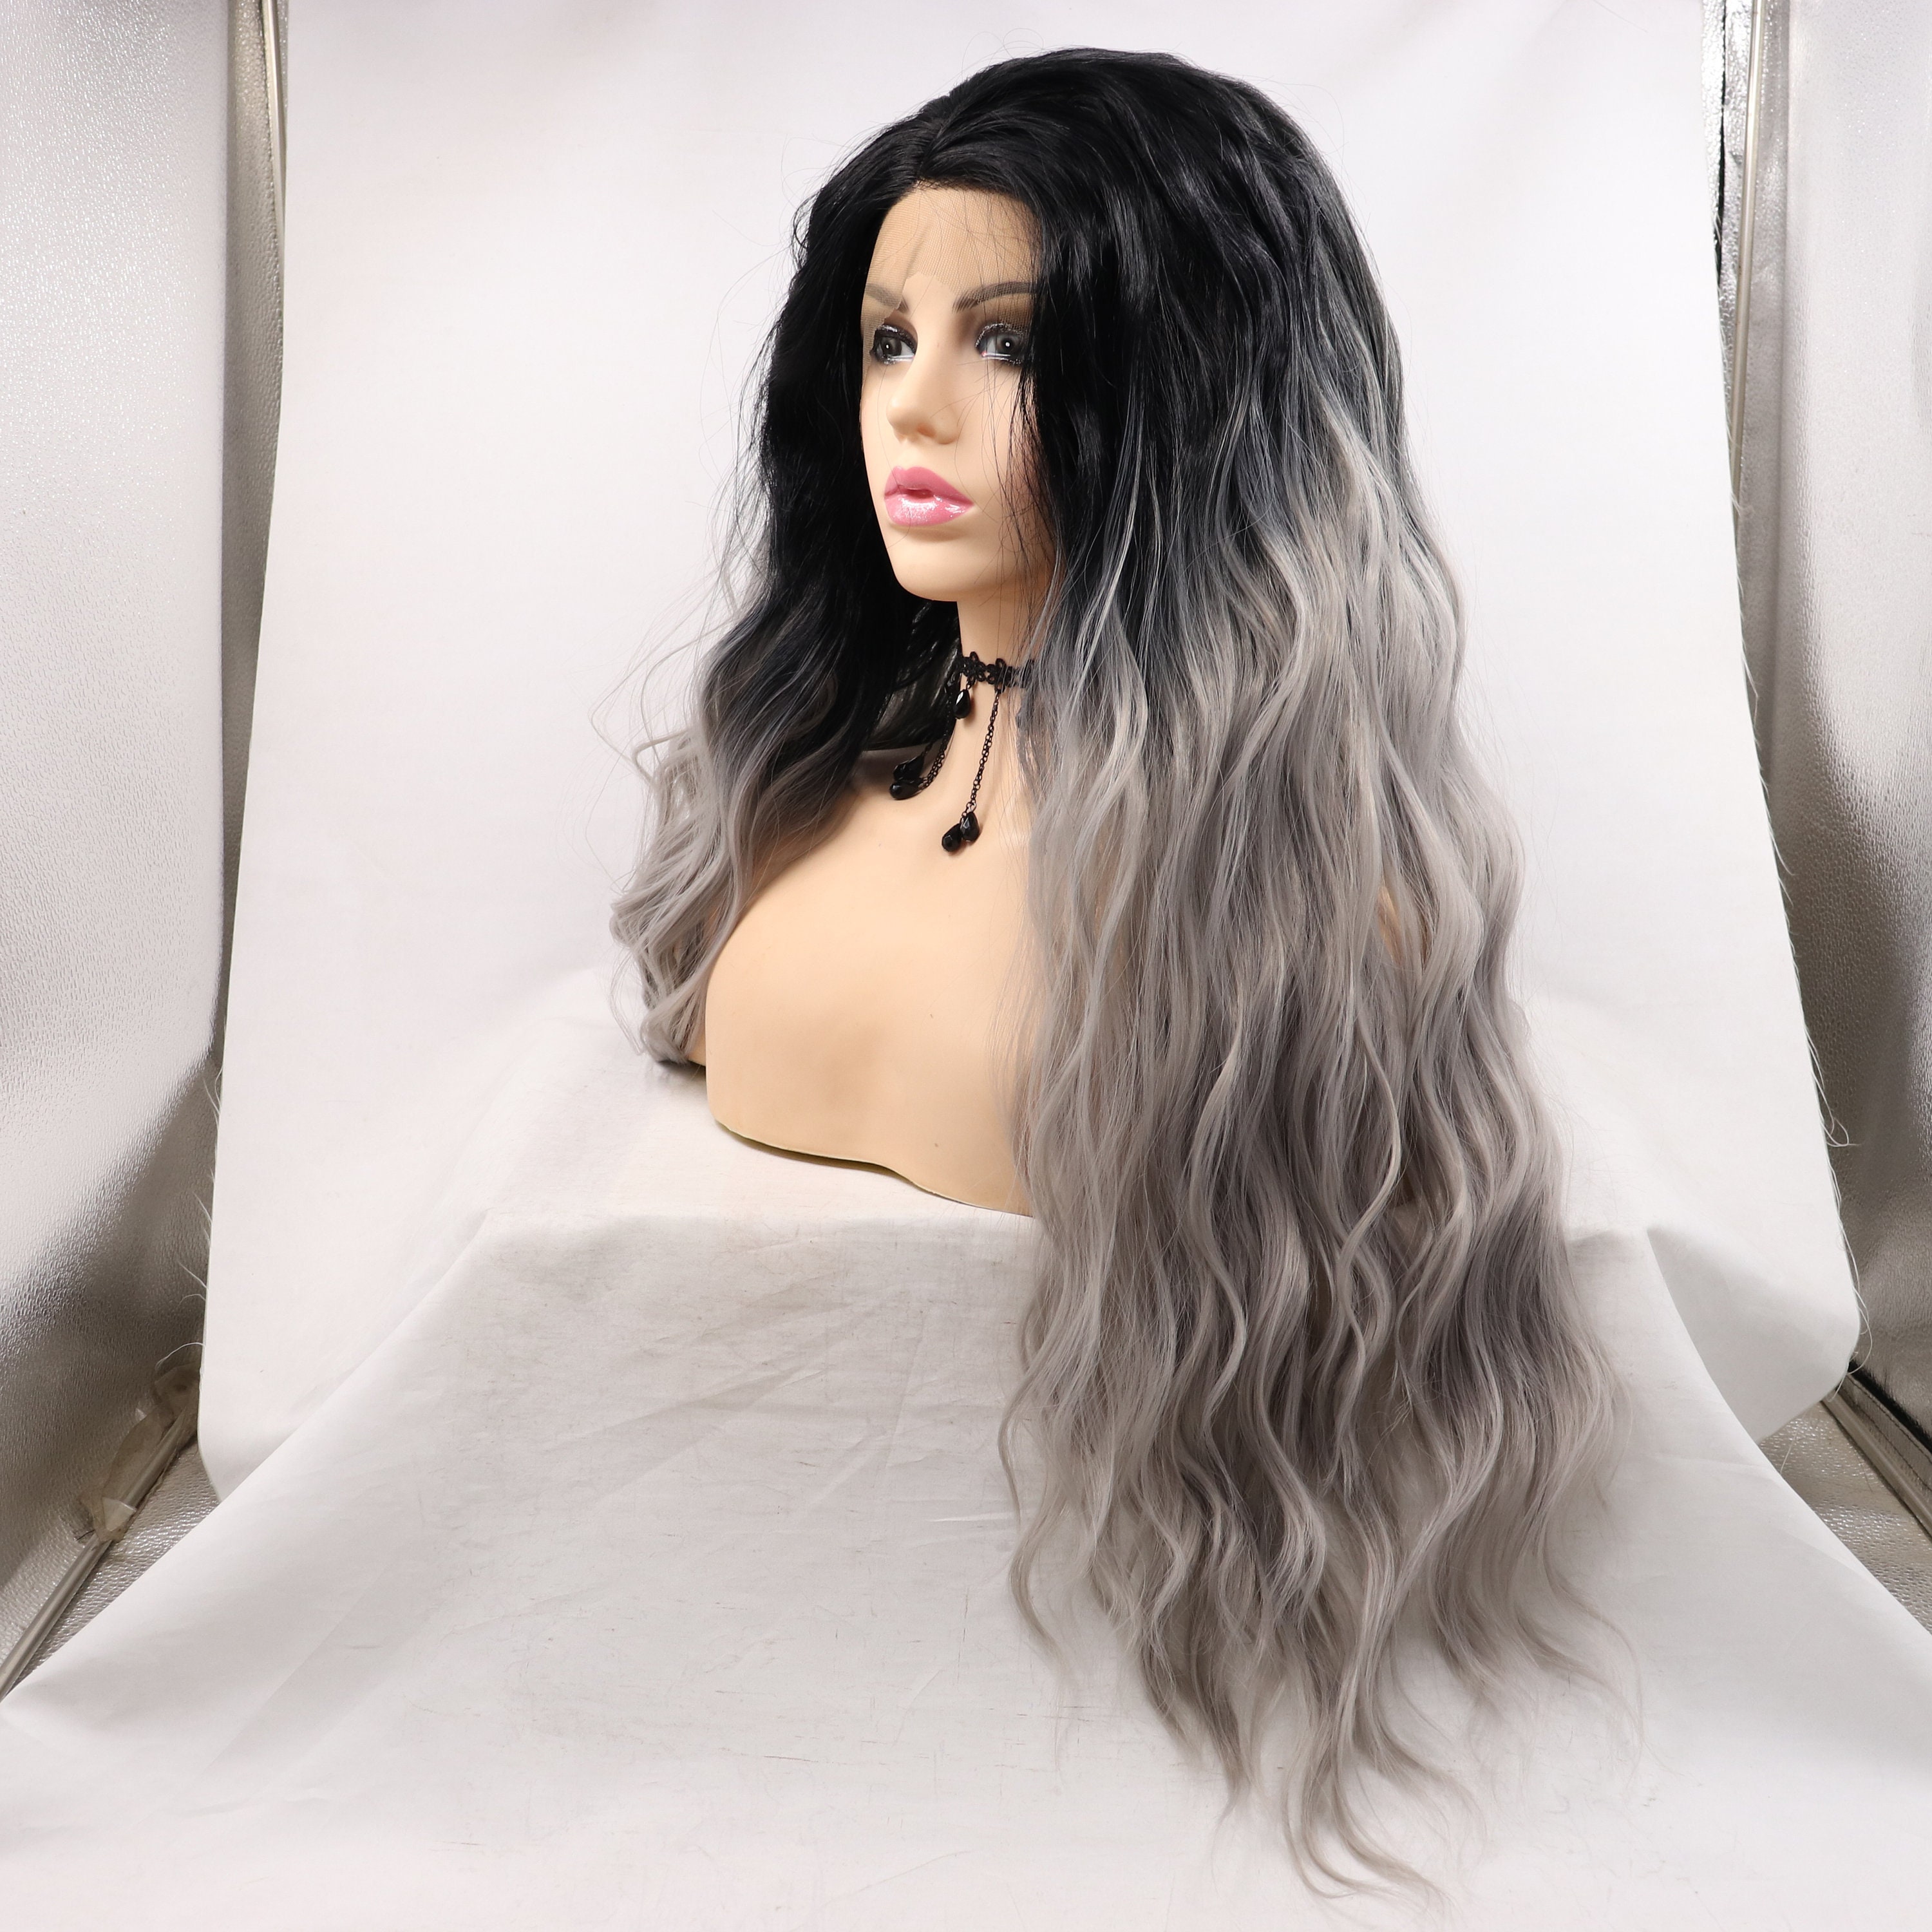 Black and Grey Ombre Women's Wig